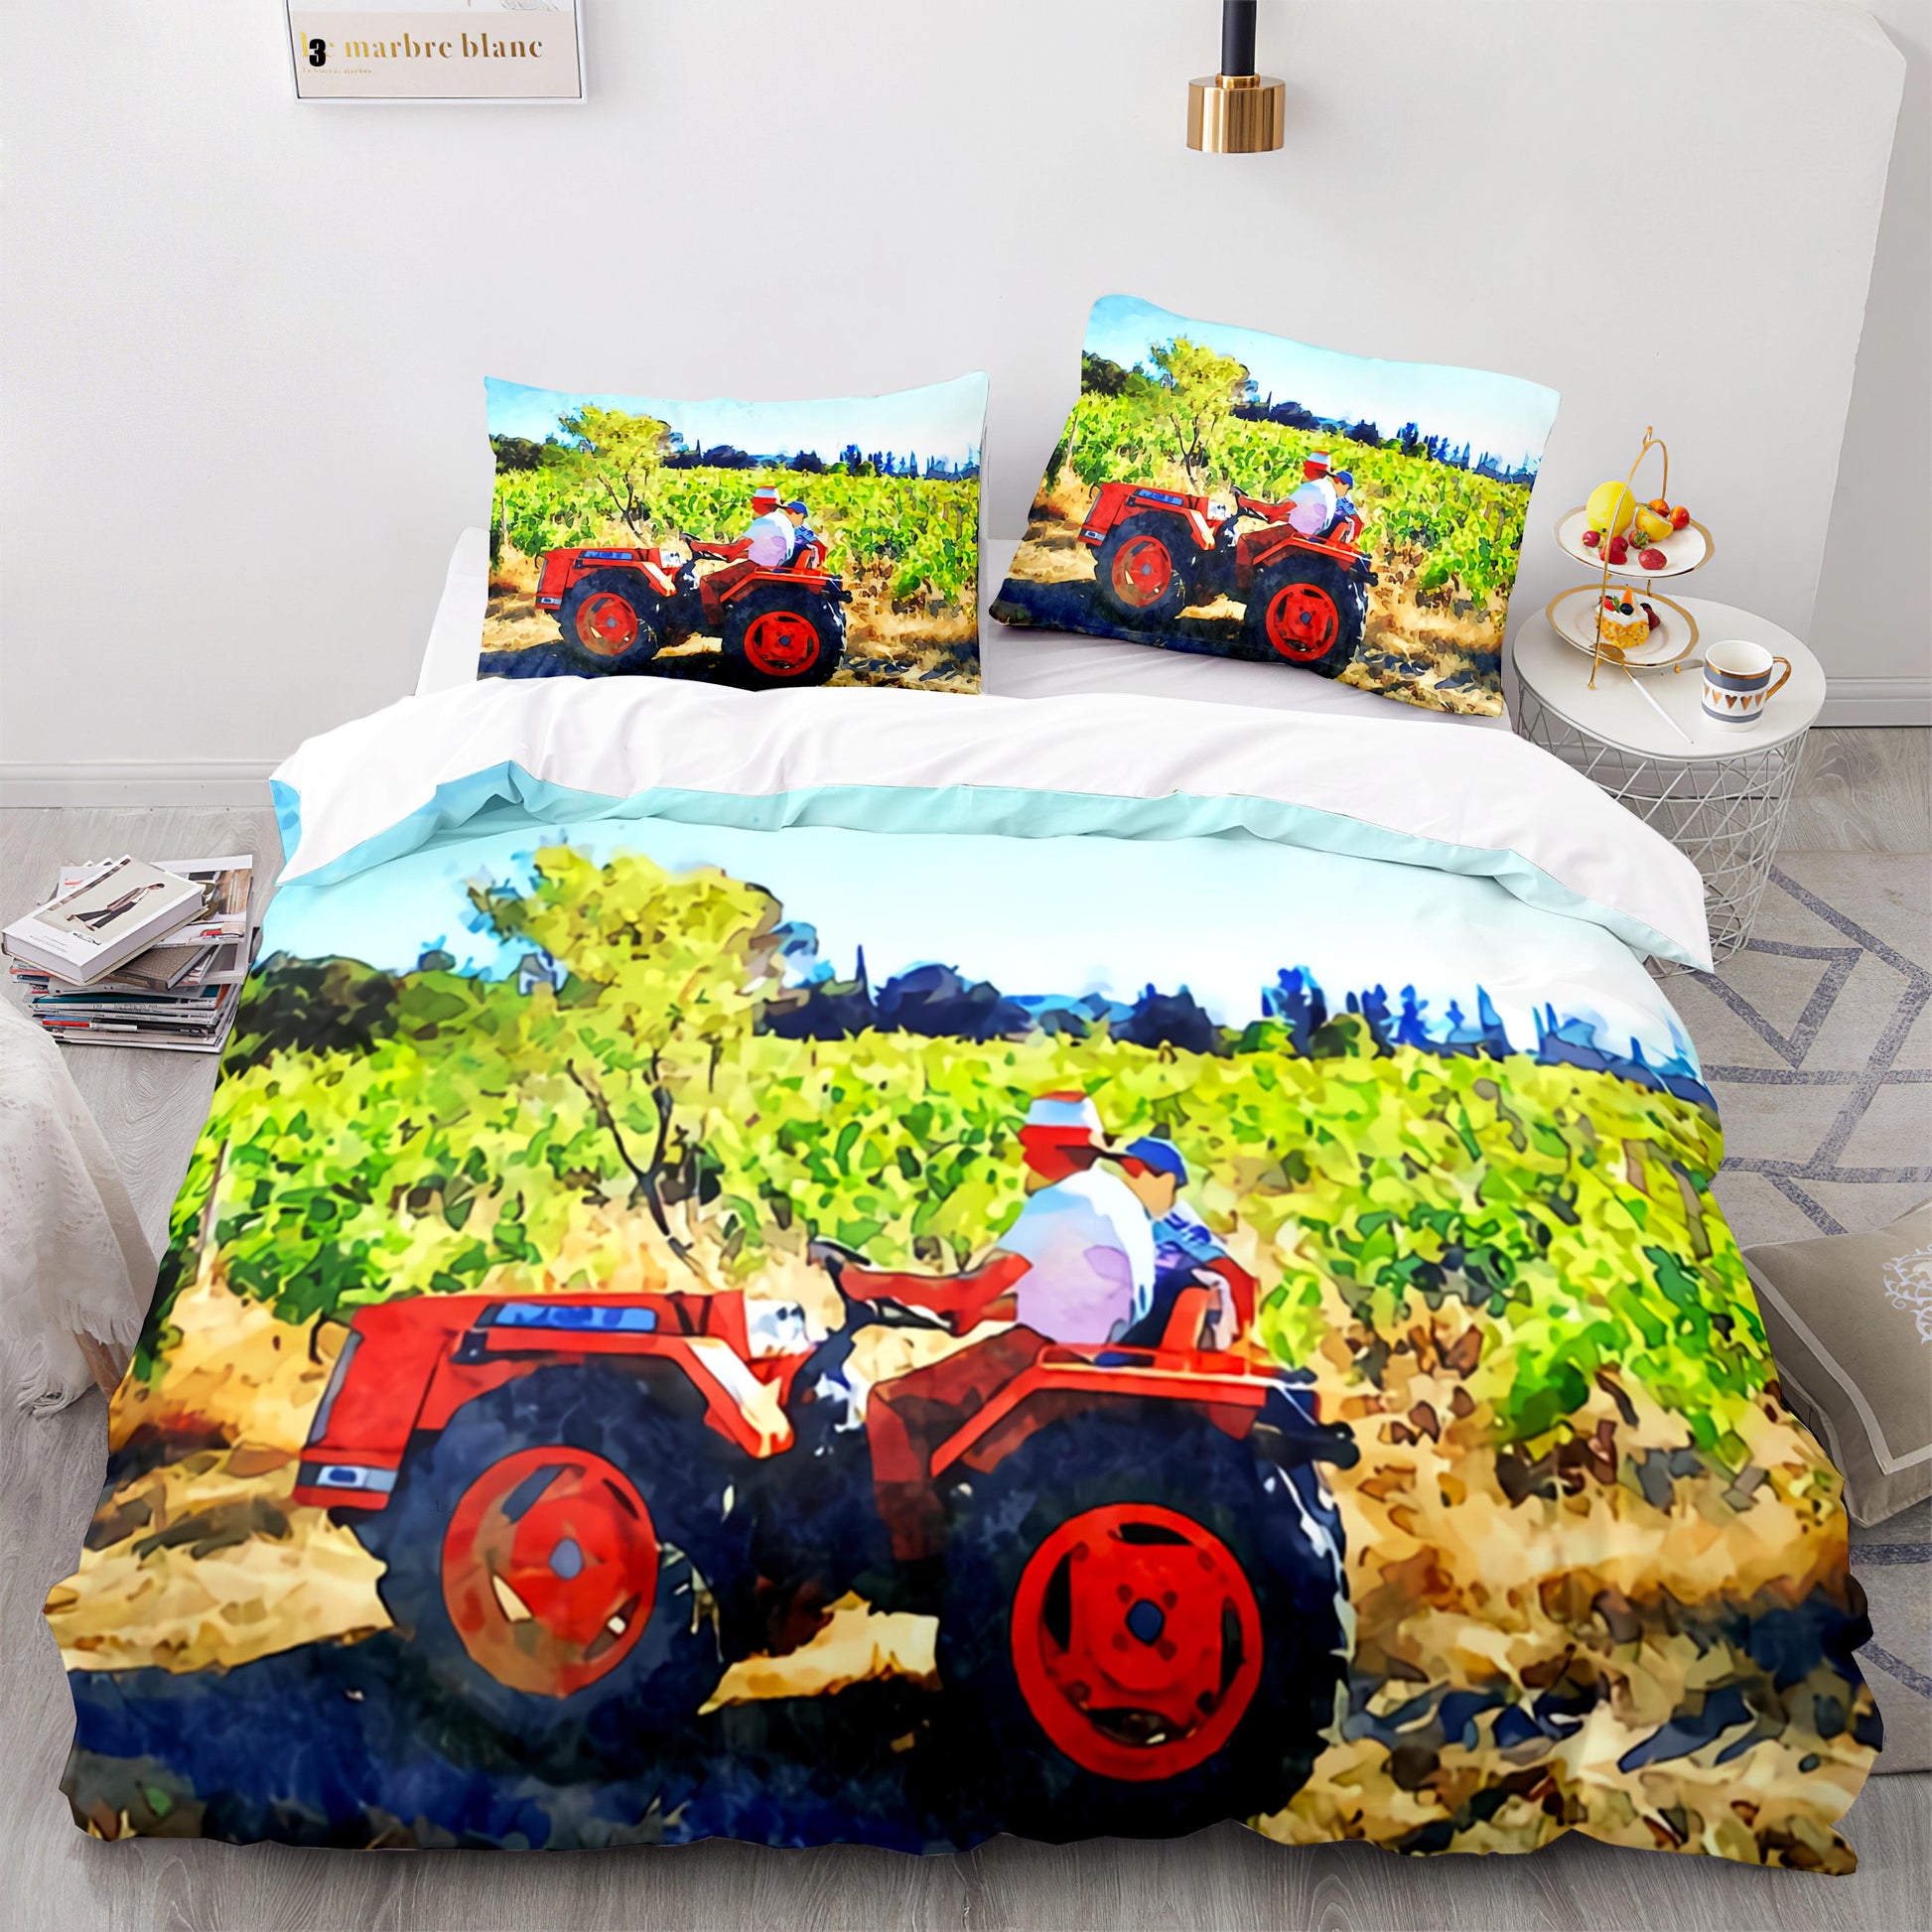 Paysan tractor duvet cover